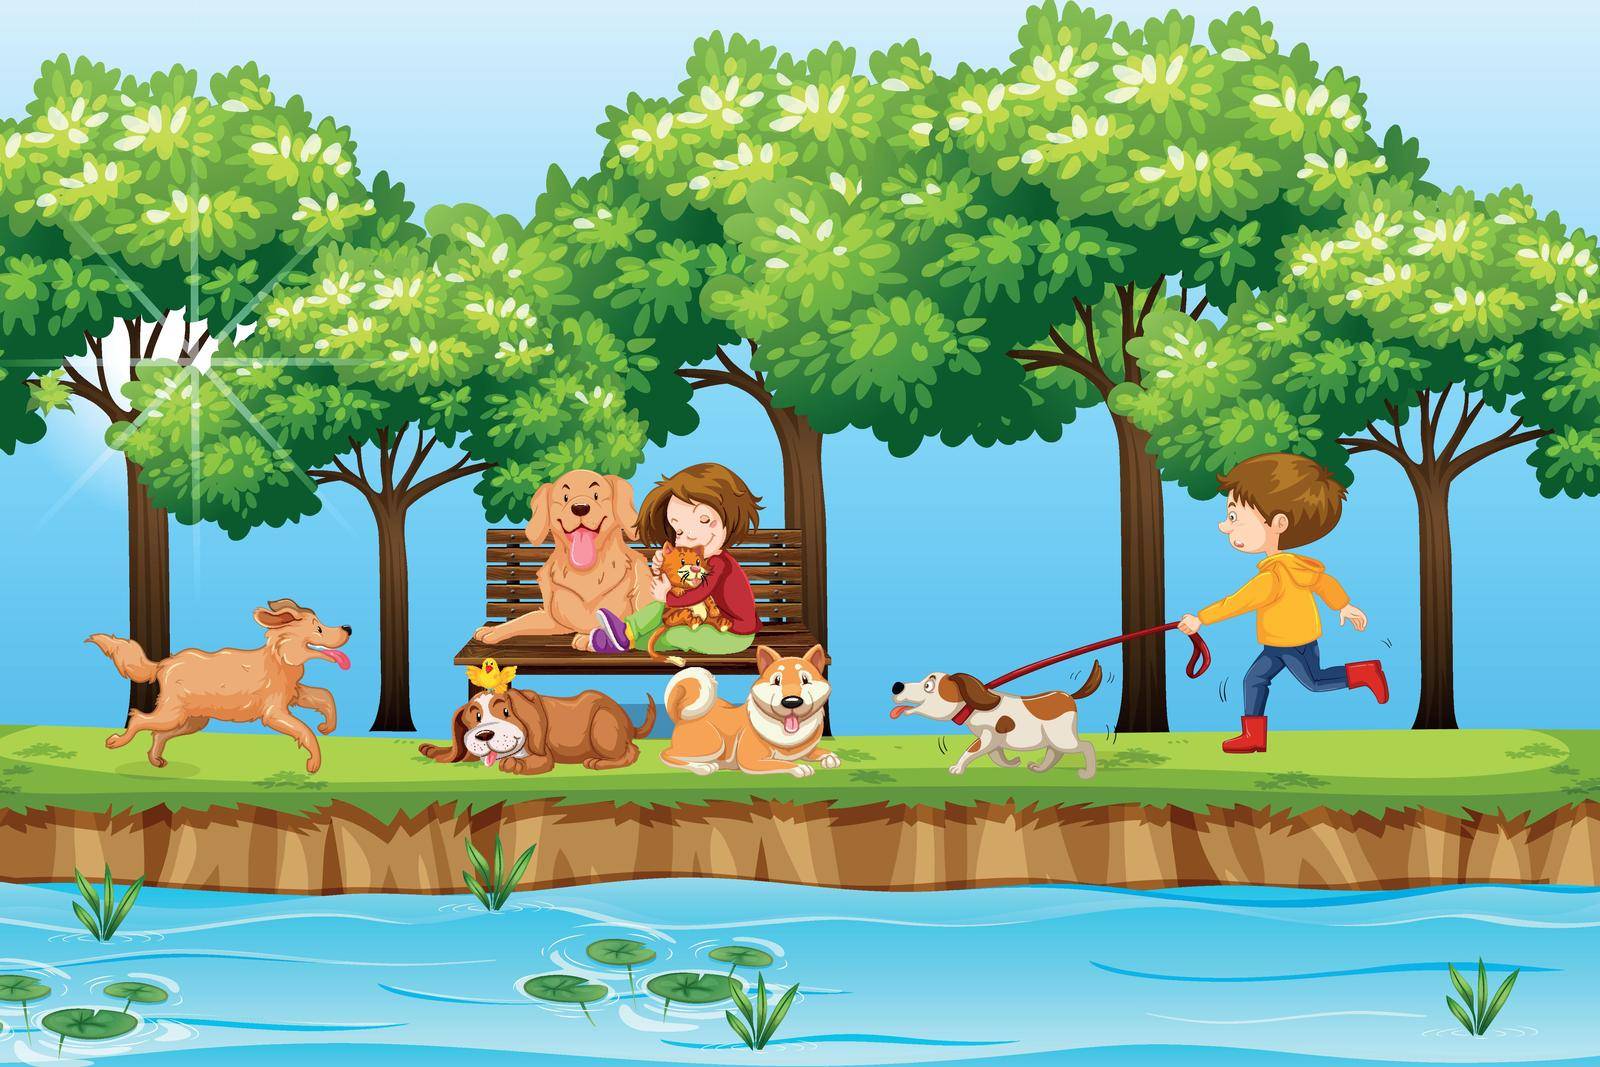 Children and dogs in park illustration